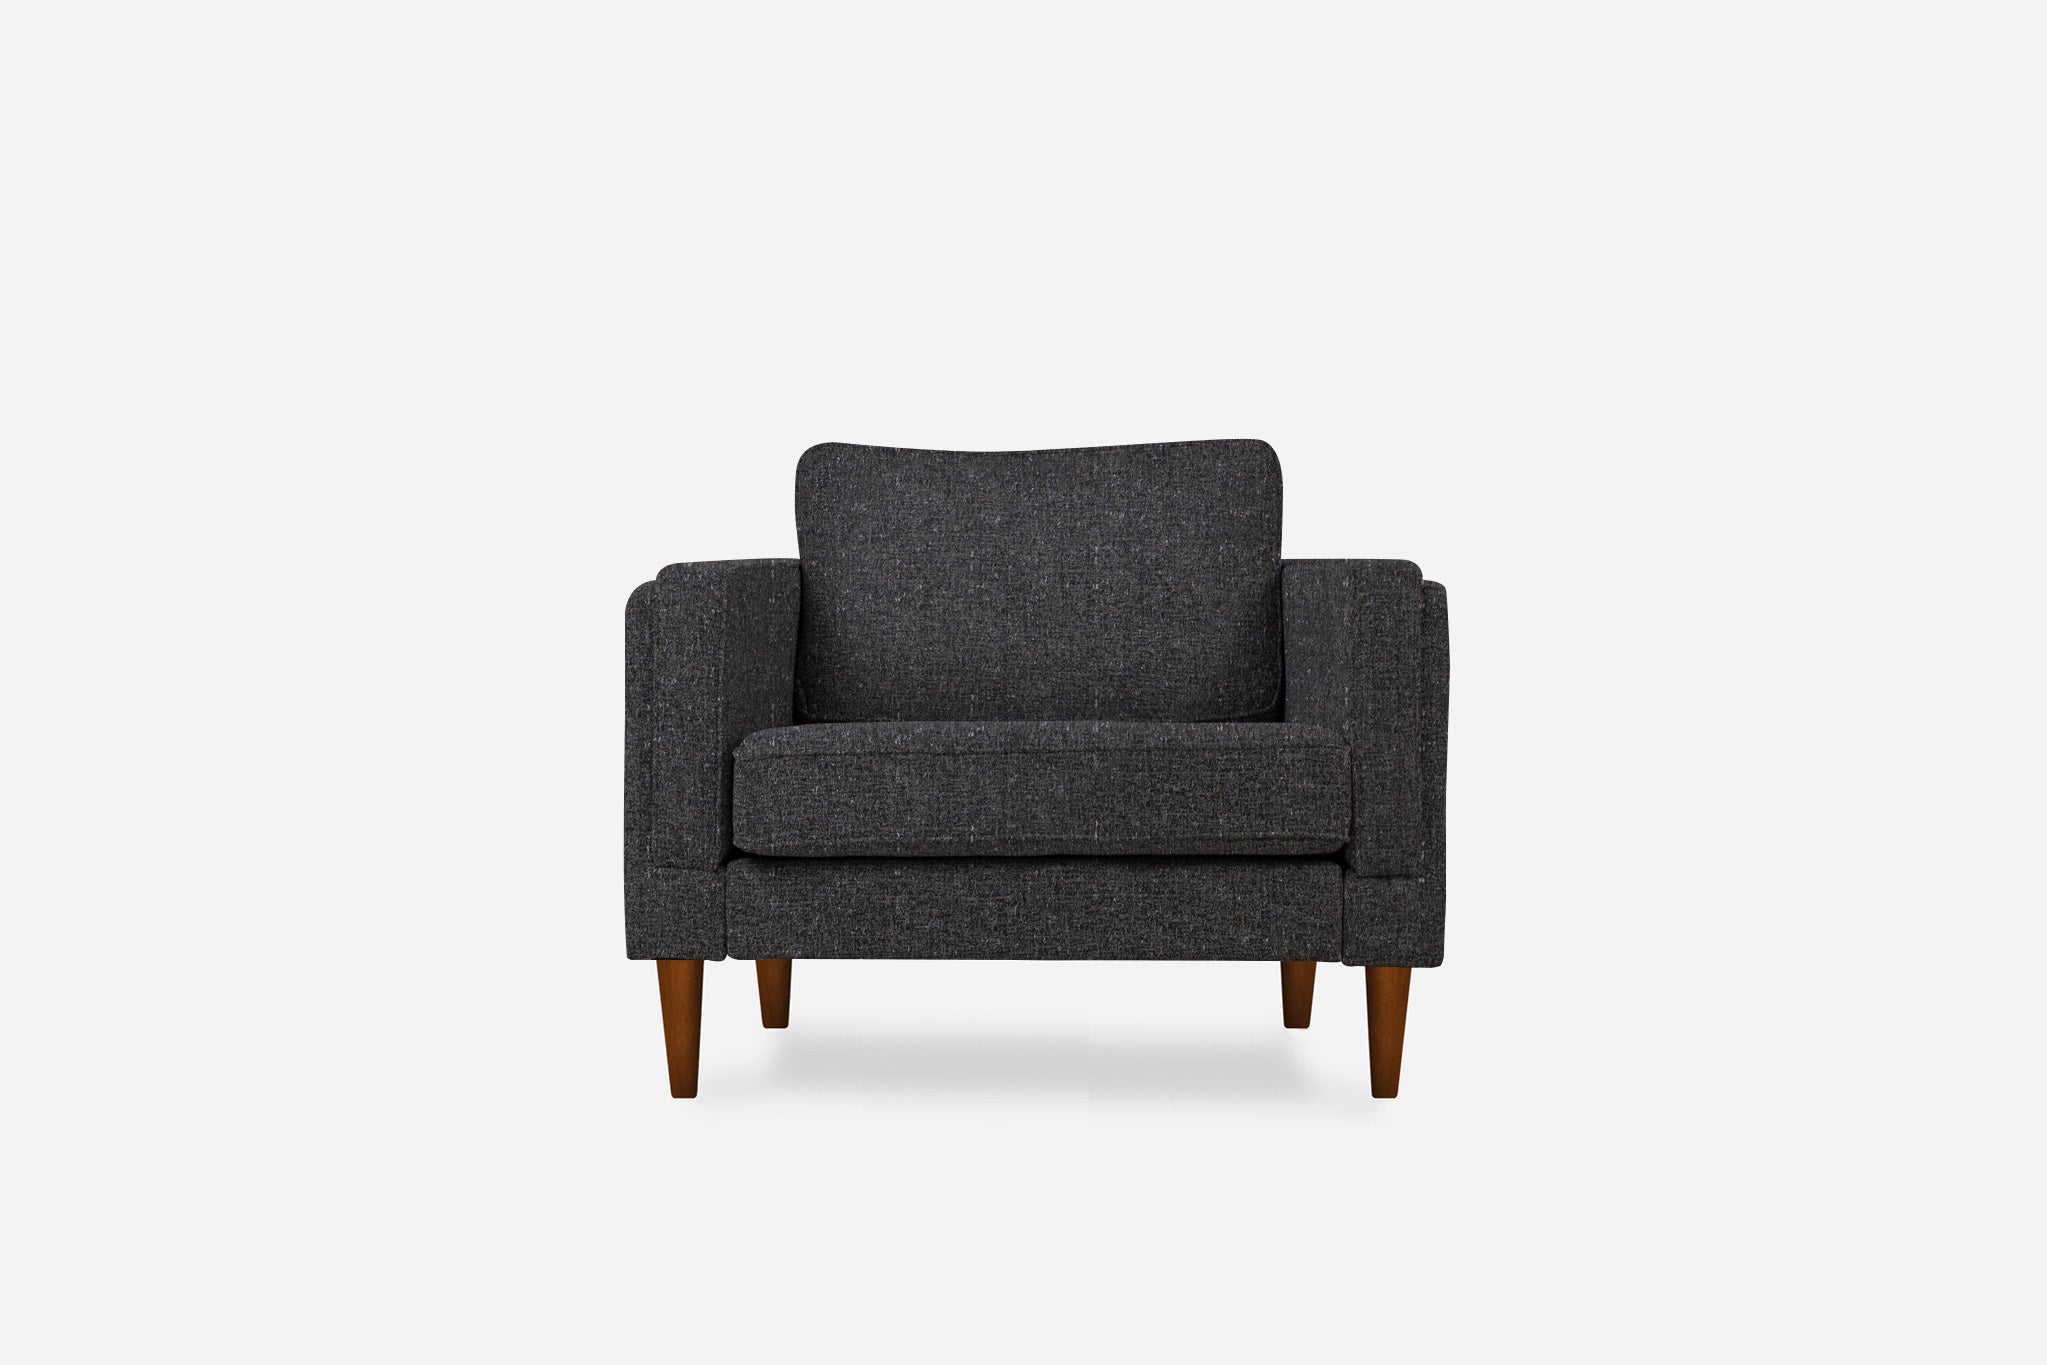 albany armchair shown in charcoal with walnut legs